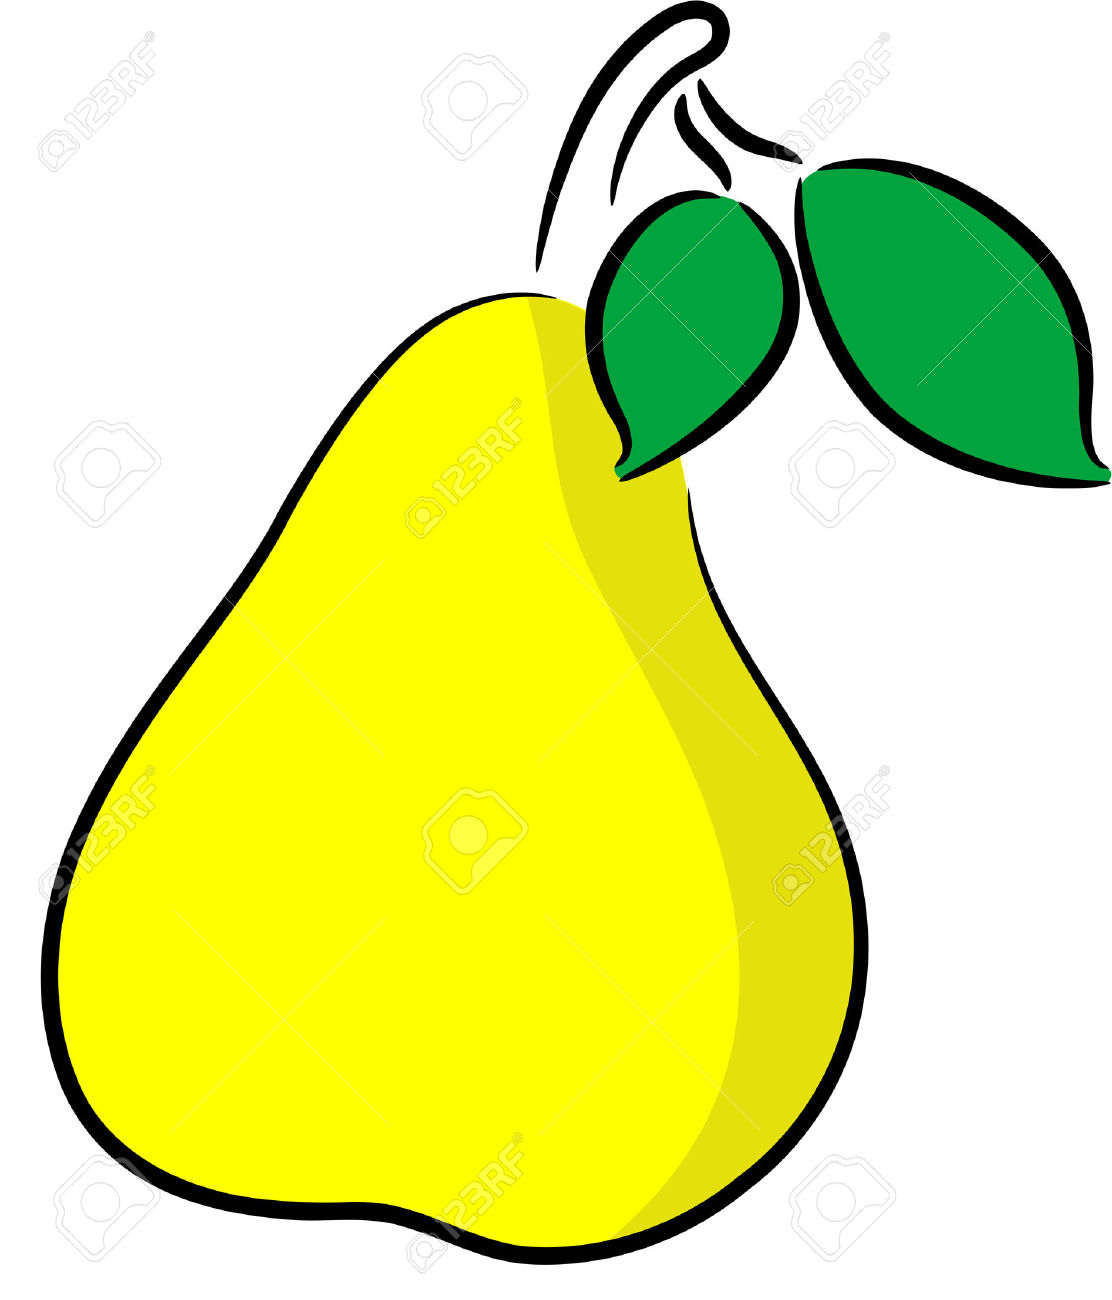 Pear clipart #5, Download drawings